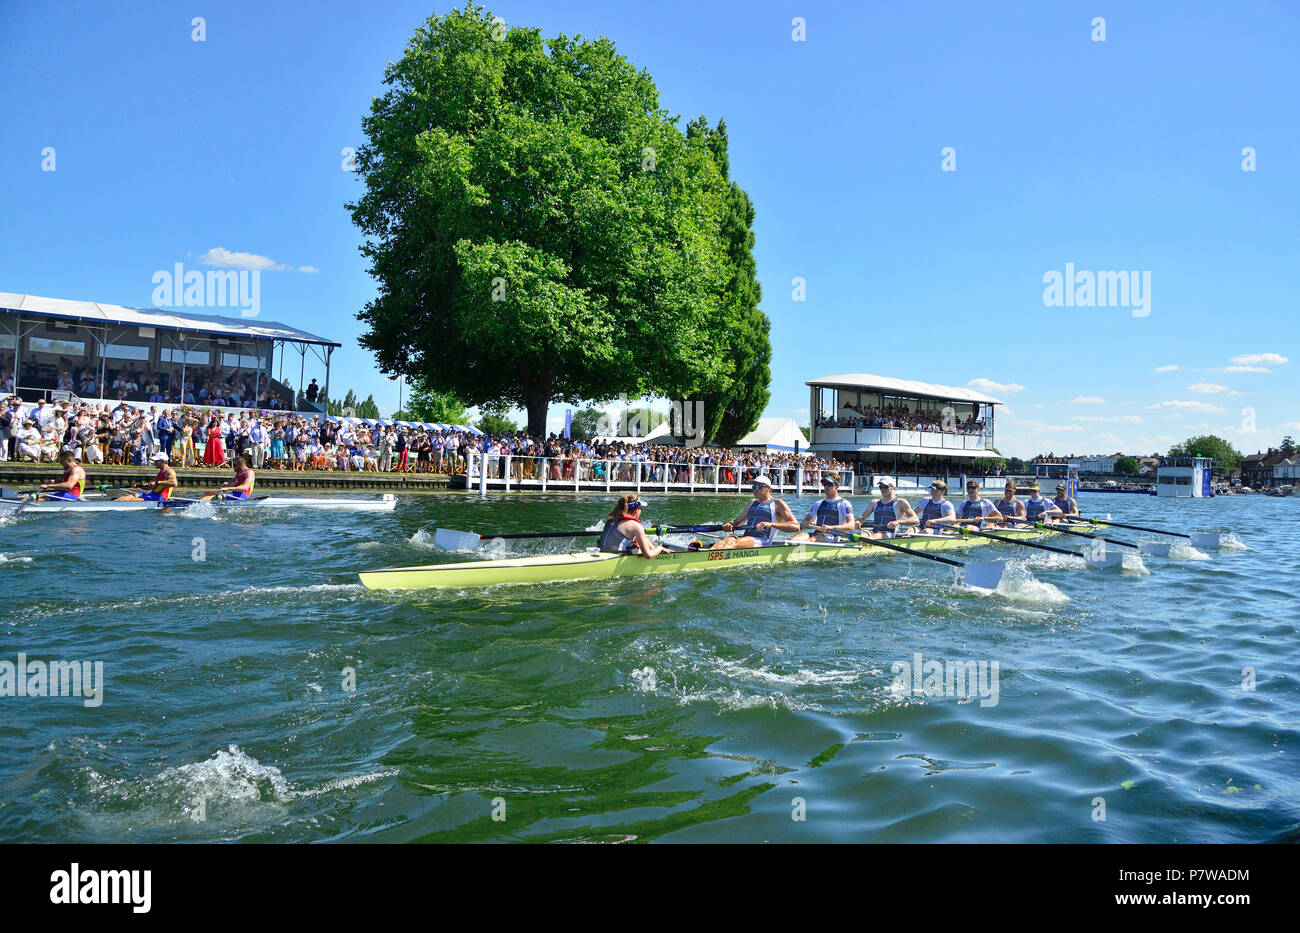 Henley-on-Thames, UK.  8th July, 2018. The Grand Challenge Cup Mens 8. .Georgina Hope Rinehart National Training Centre Australia beat Clubul Sportiv Dinamo, Bucuresti and Clubul Sportiv al Armatei Steaua, Bucuresti Romania. by 3/4 length. Australia set a new course record of 5:53 minutes and are the fastest crew to ever row the Henley course. Credit Wendy Johnson/Alamy Live News Stock Photo